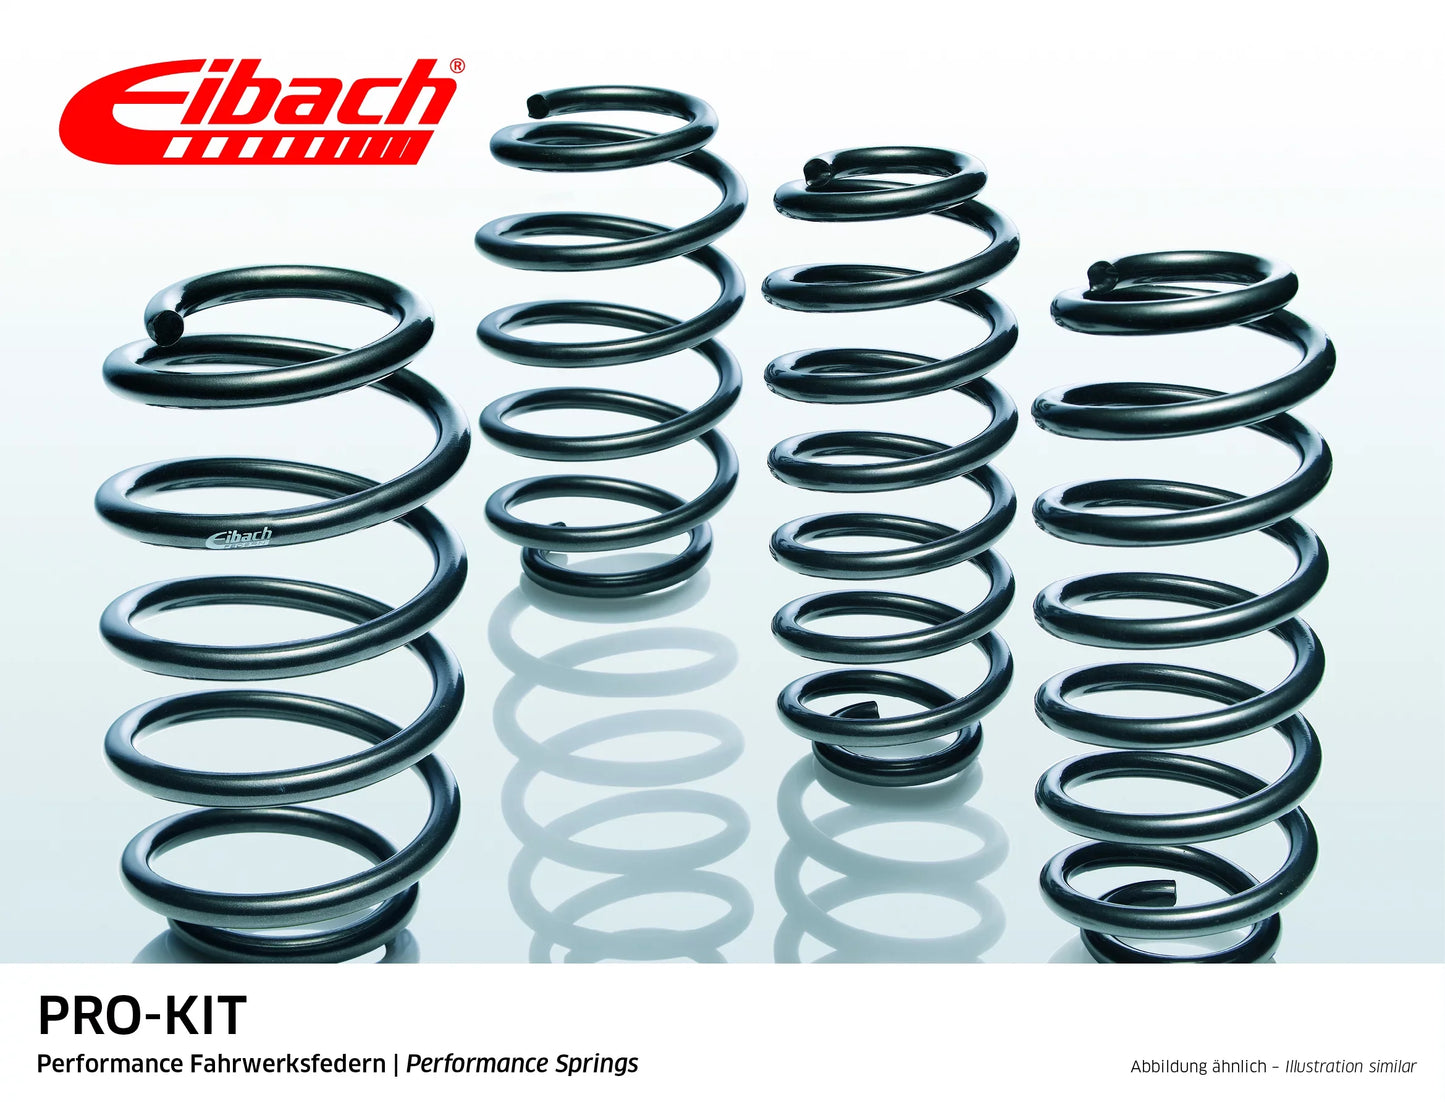 Eibach Pro-Kit Lowering Springs (E10-35-010-01-22) at £204.00